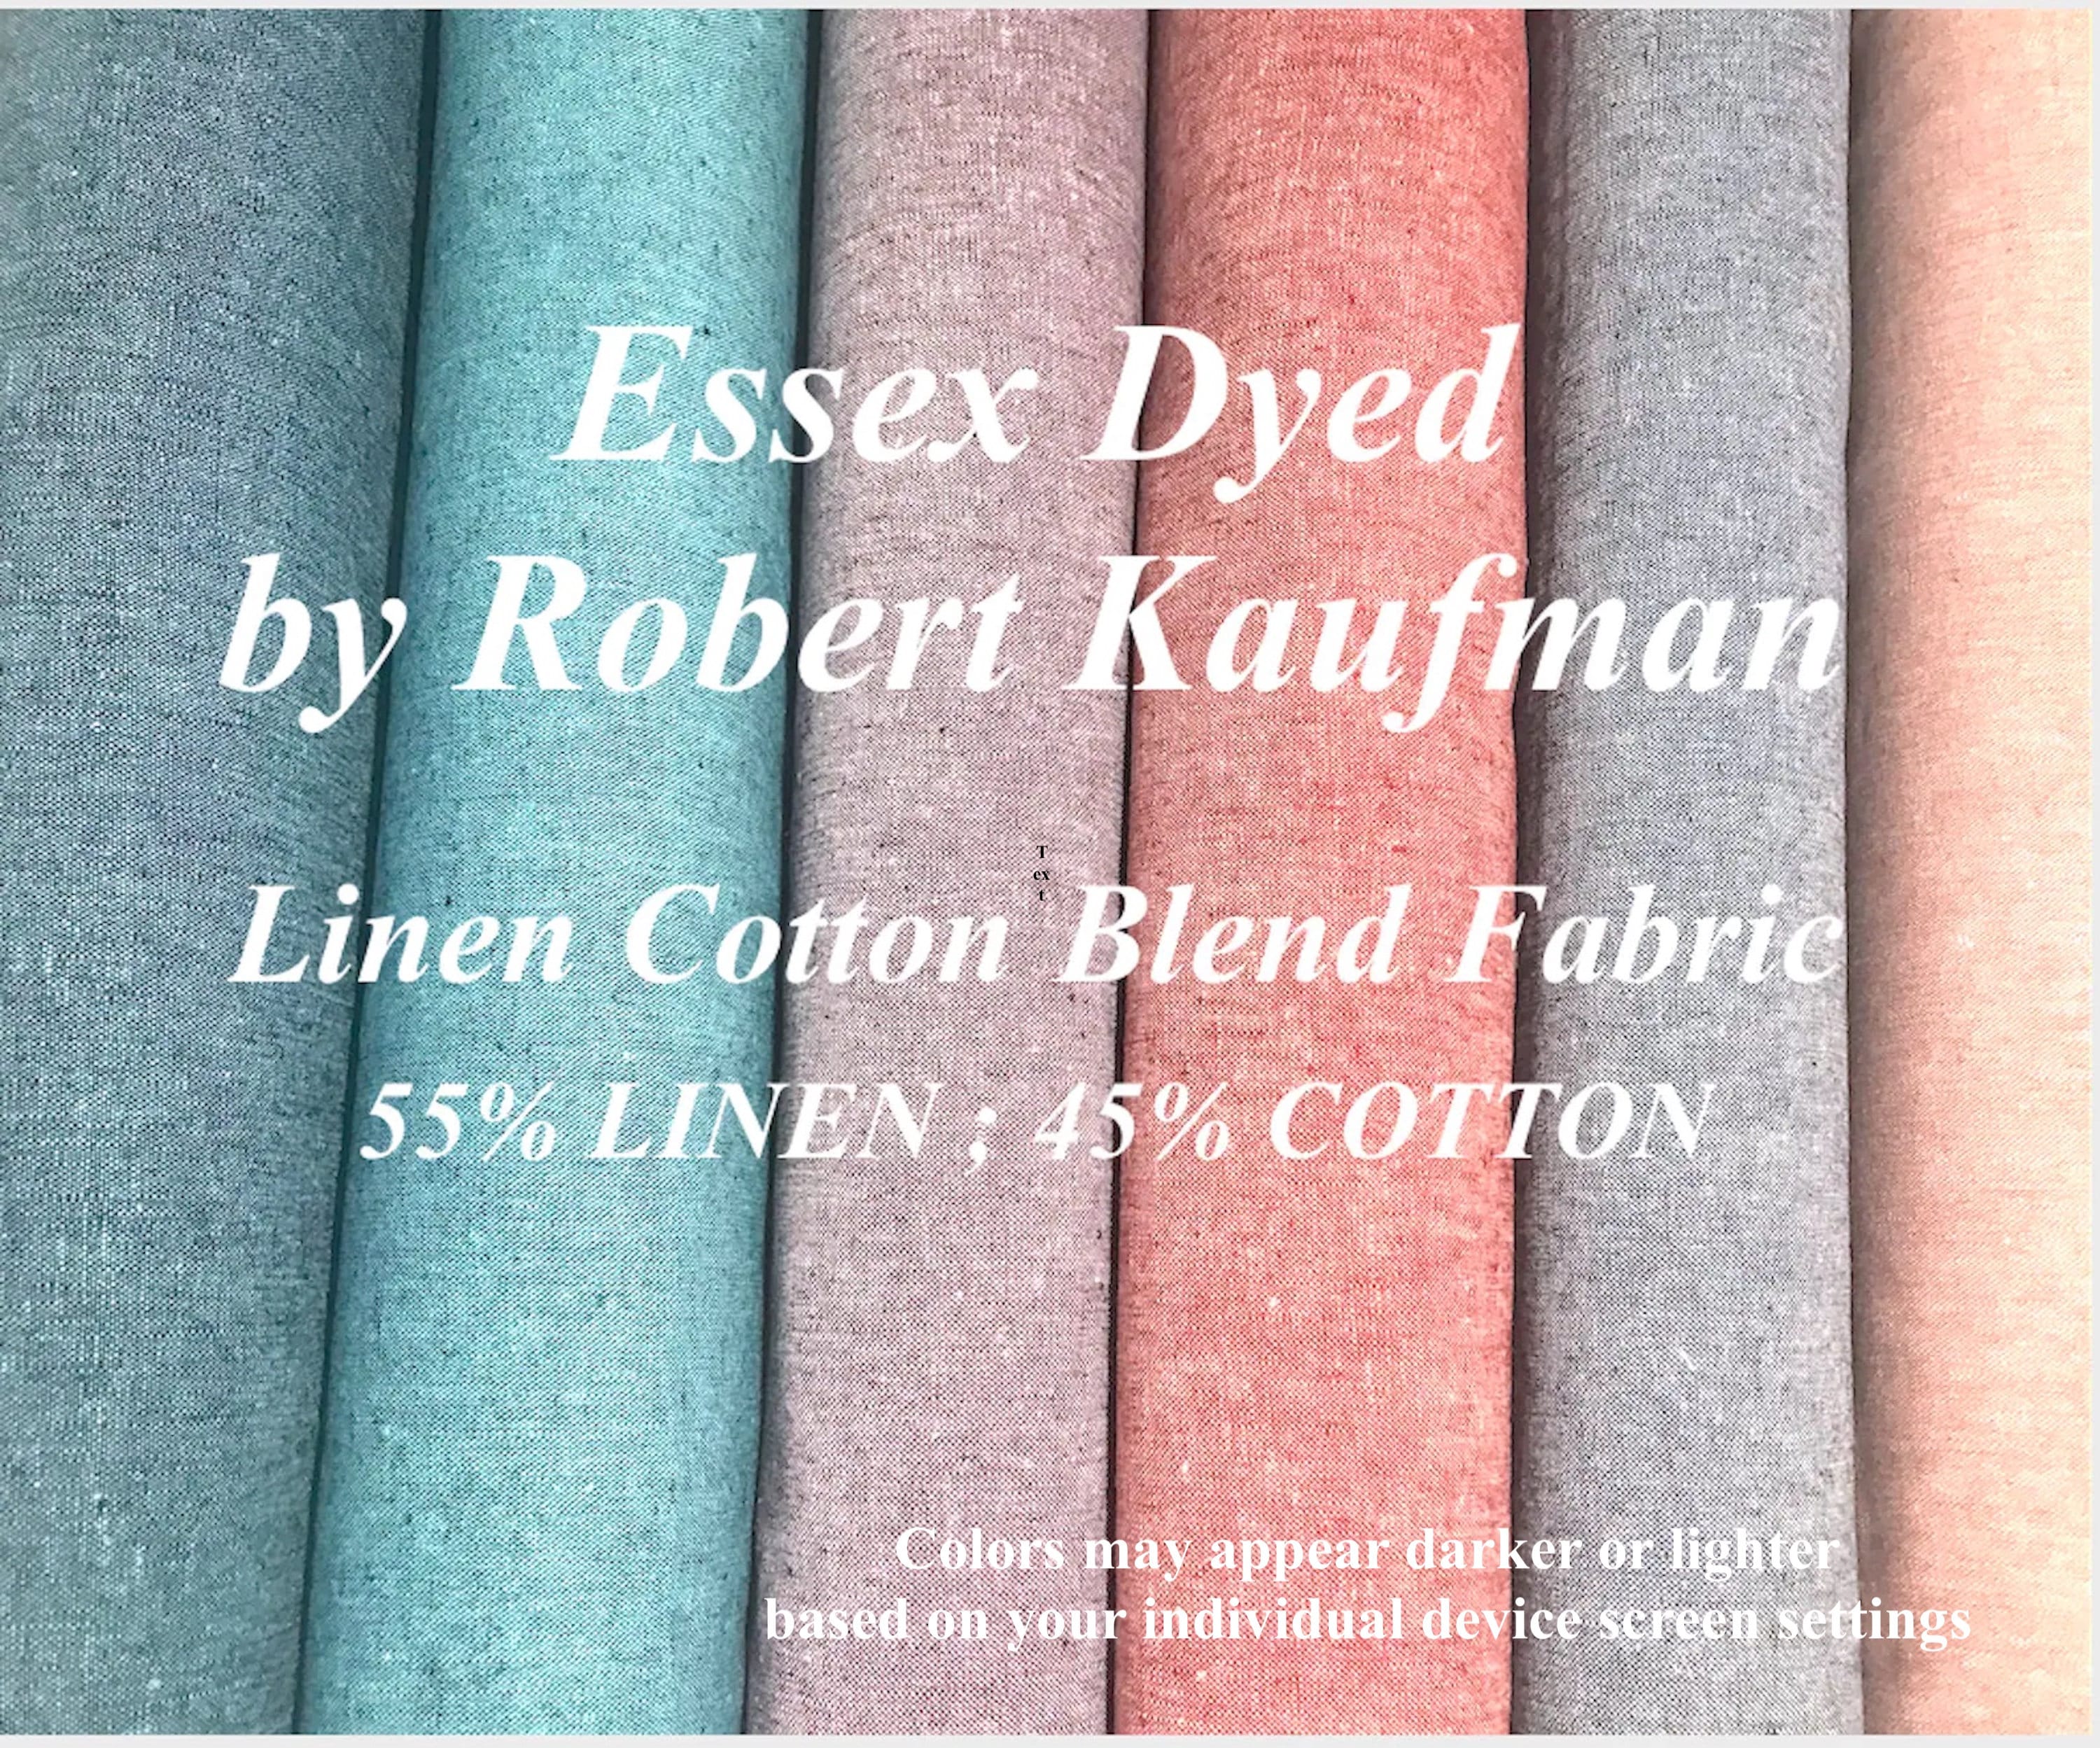 Essex Yarn Dyed Linen Cotton Blend Fabric By Robert Kaufman Many Colors Malibu Berry Peacock Red Lilac Charcoal Graphite Seafoam More